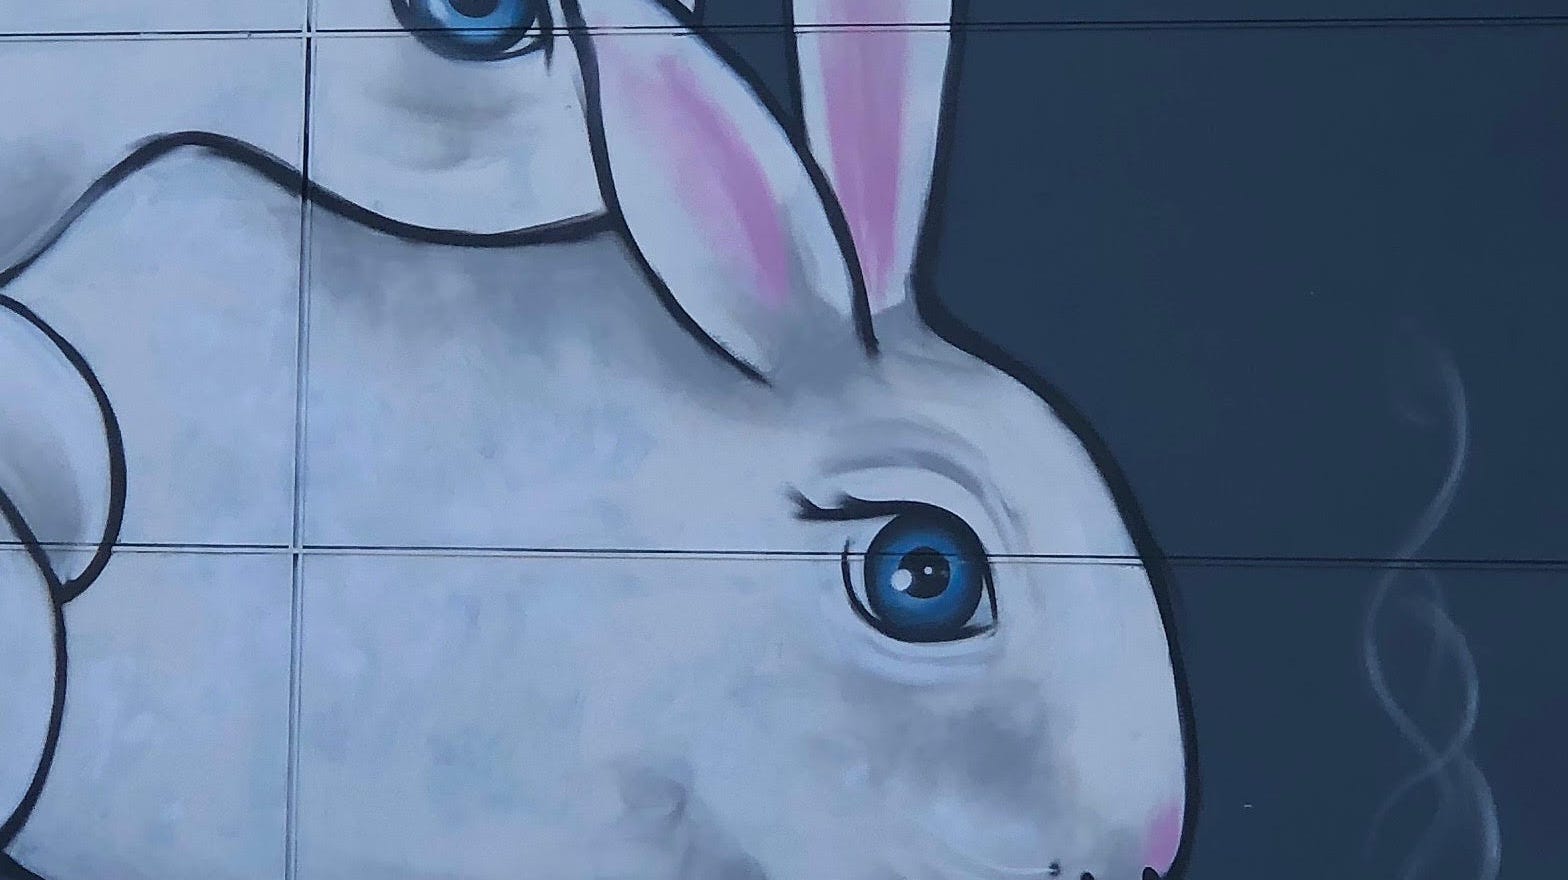 Beholder In Indianapolis Has A Cartoon Mural Of Two Rabbits Having Sex